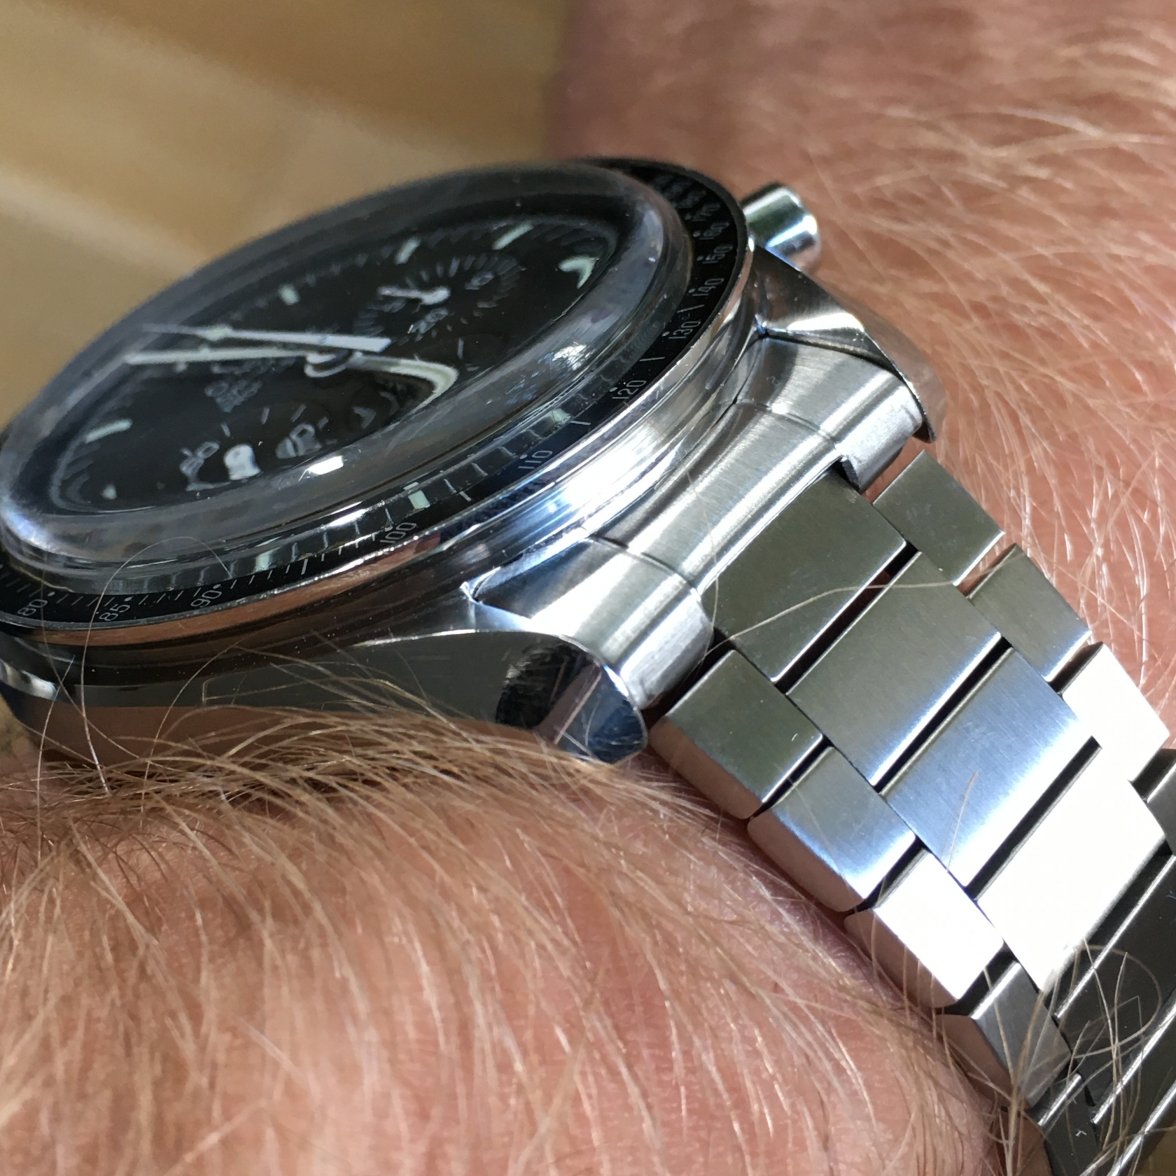 apollo 11 50th moonwatch bracelet available? | Page 12 | Omega Forums